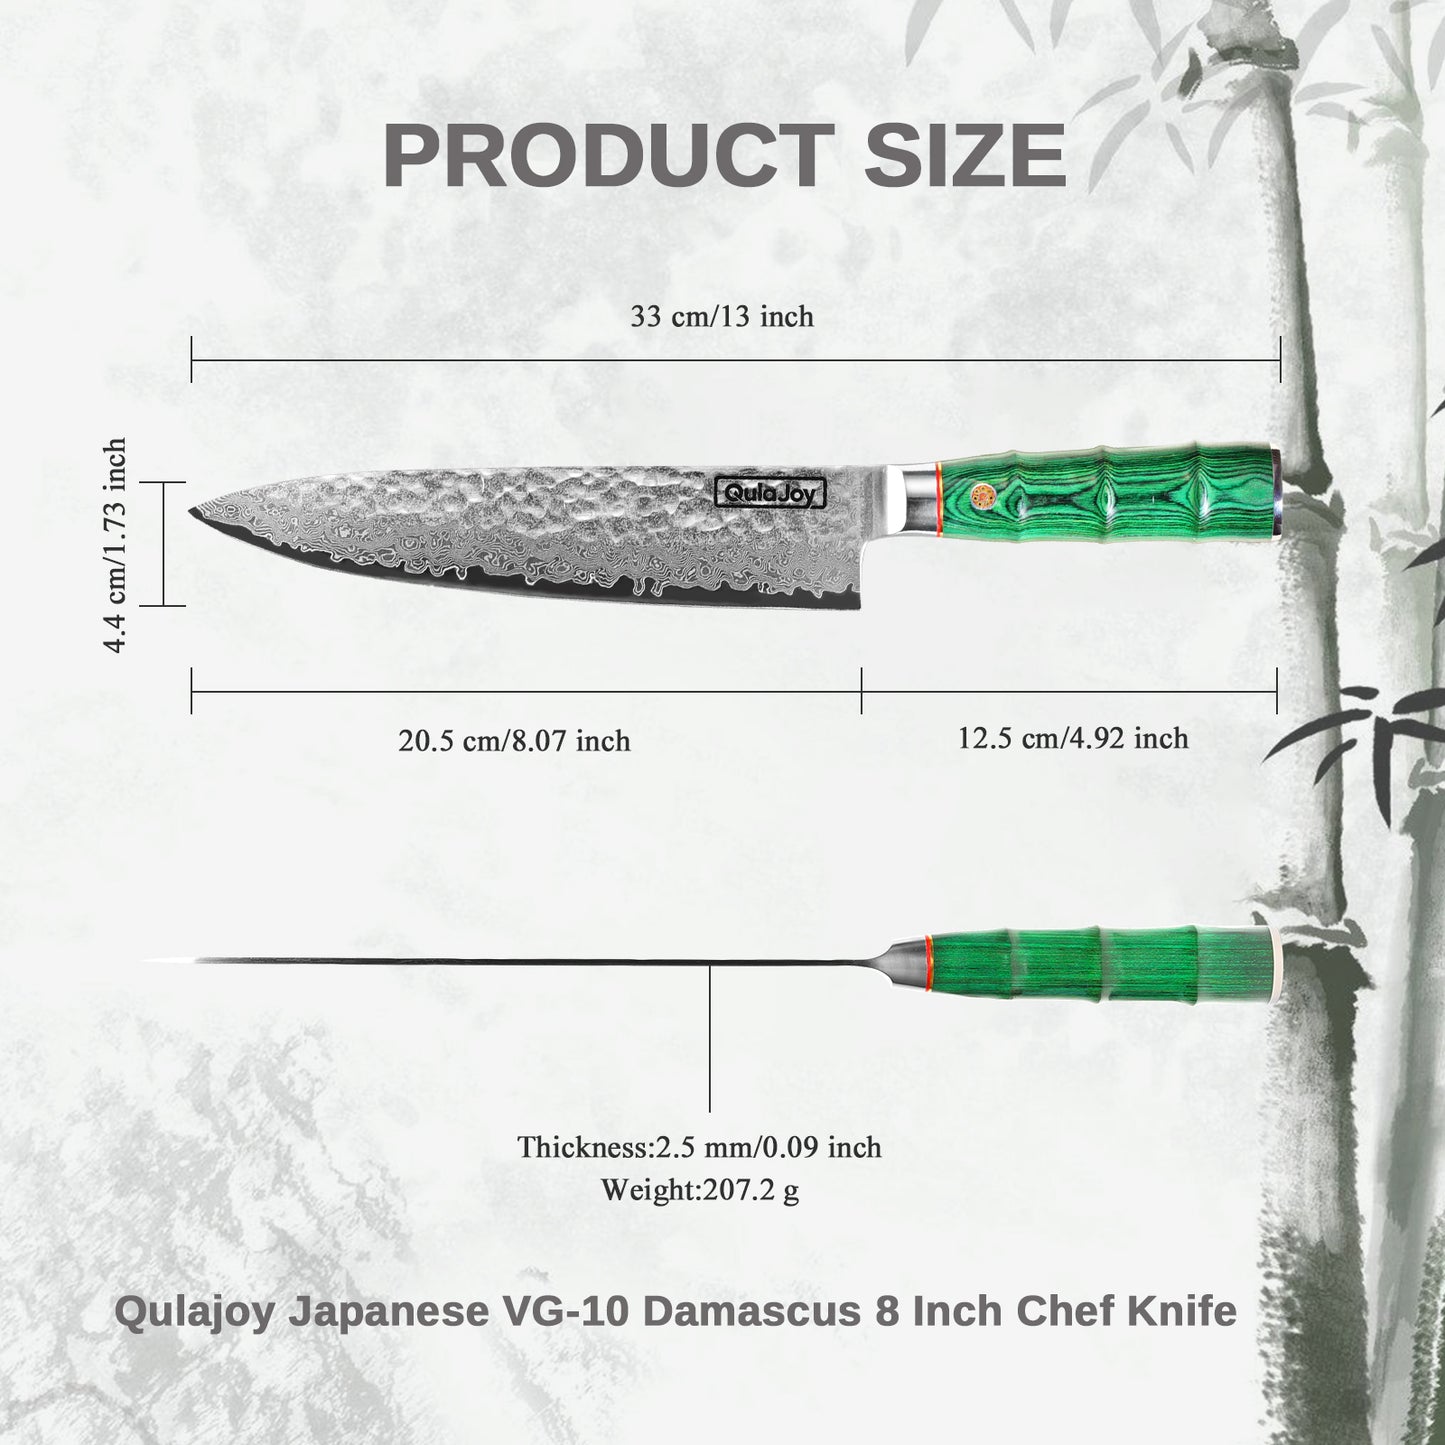 Qulajoy Japanese Chef Knife 8 Inch,67 Layers Damascus VG-10 Steel Core,Professional Hammered Kitchen Knife,Handcrafted With Ergonomic Bamboo Shape Handle